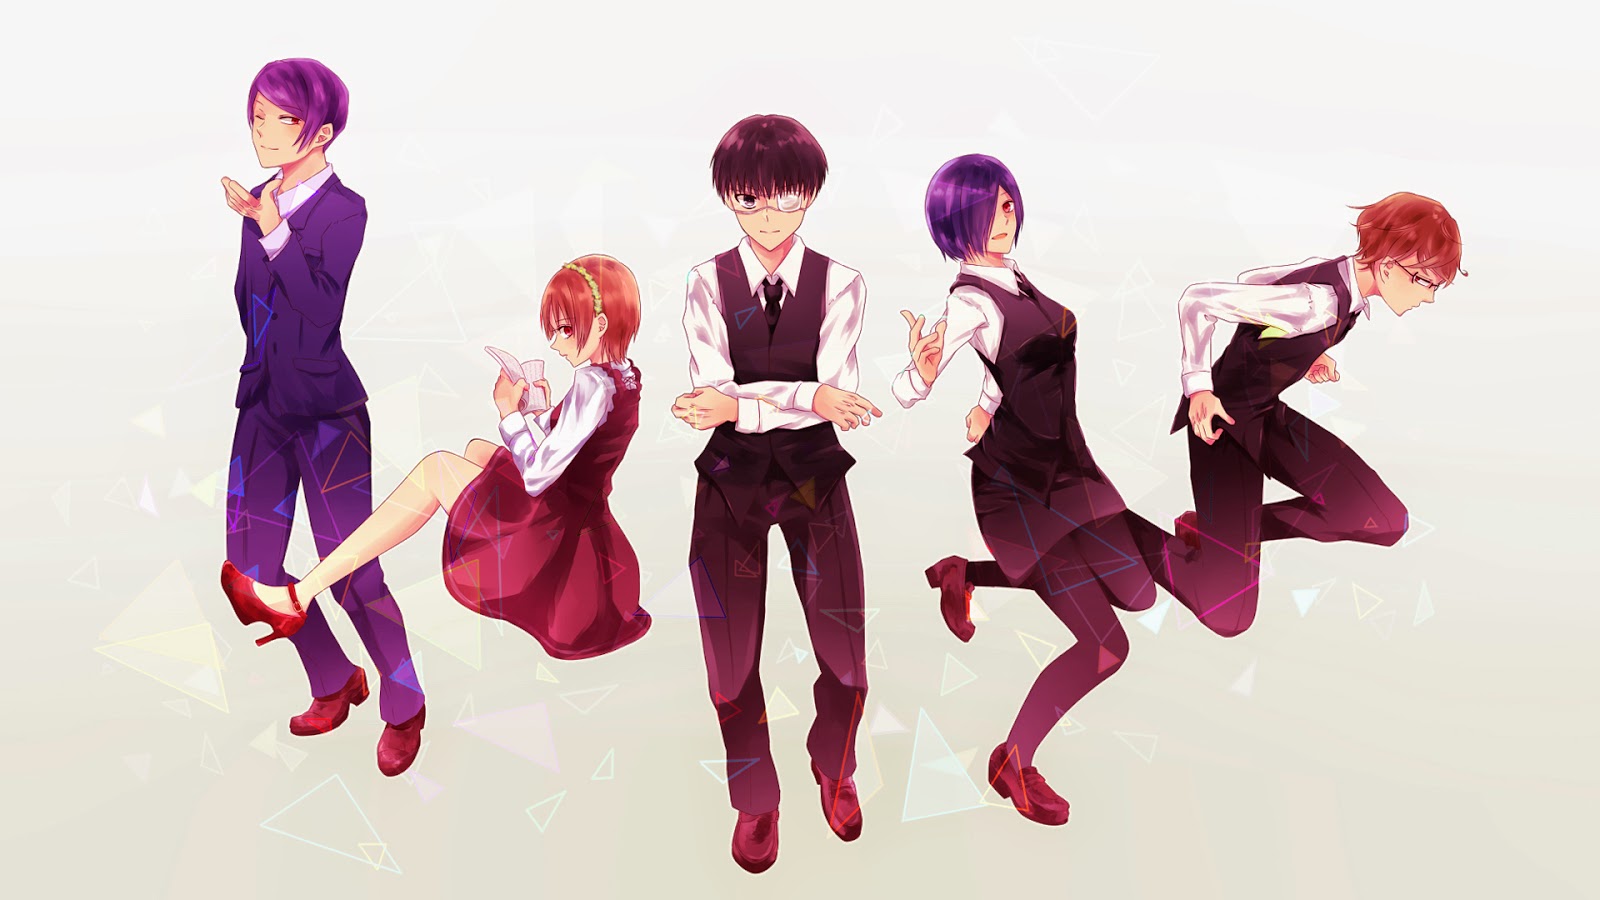 Review - Tokyo Ghoul - IntoxiAnime